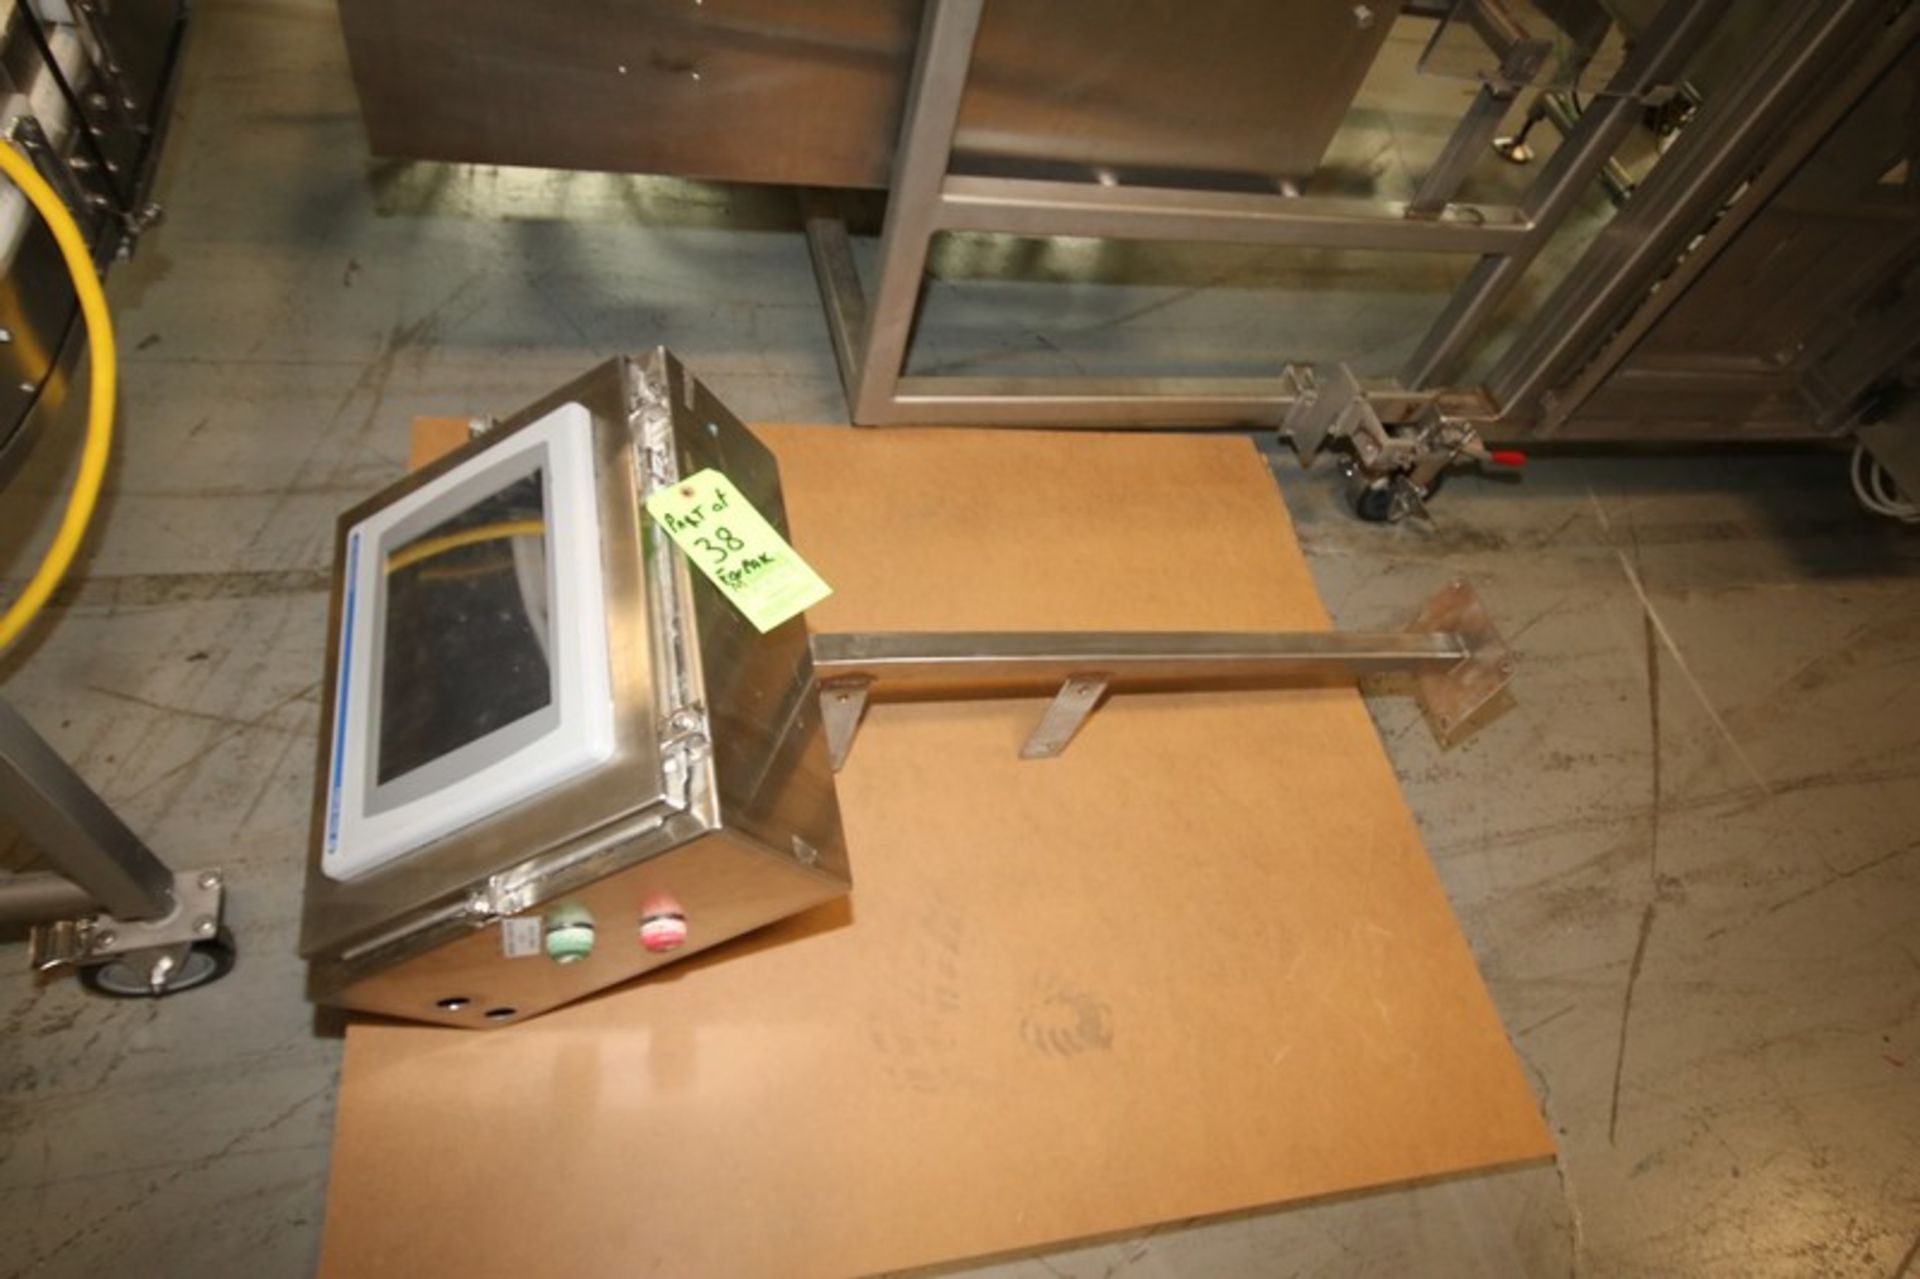 Barry Wehmiller / Thiele / Forpak Sheet Inserter / Dough Stacker, Model - Reciprocating Placer, SN - Image 10 of 32